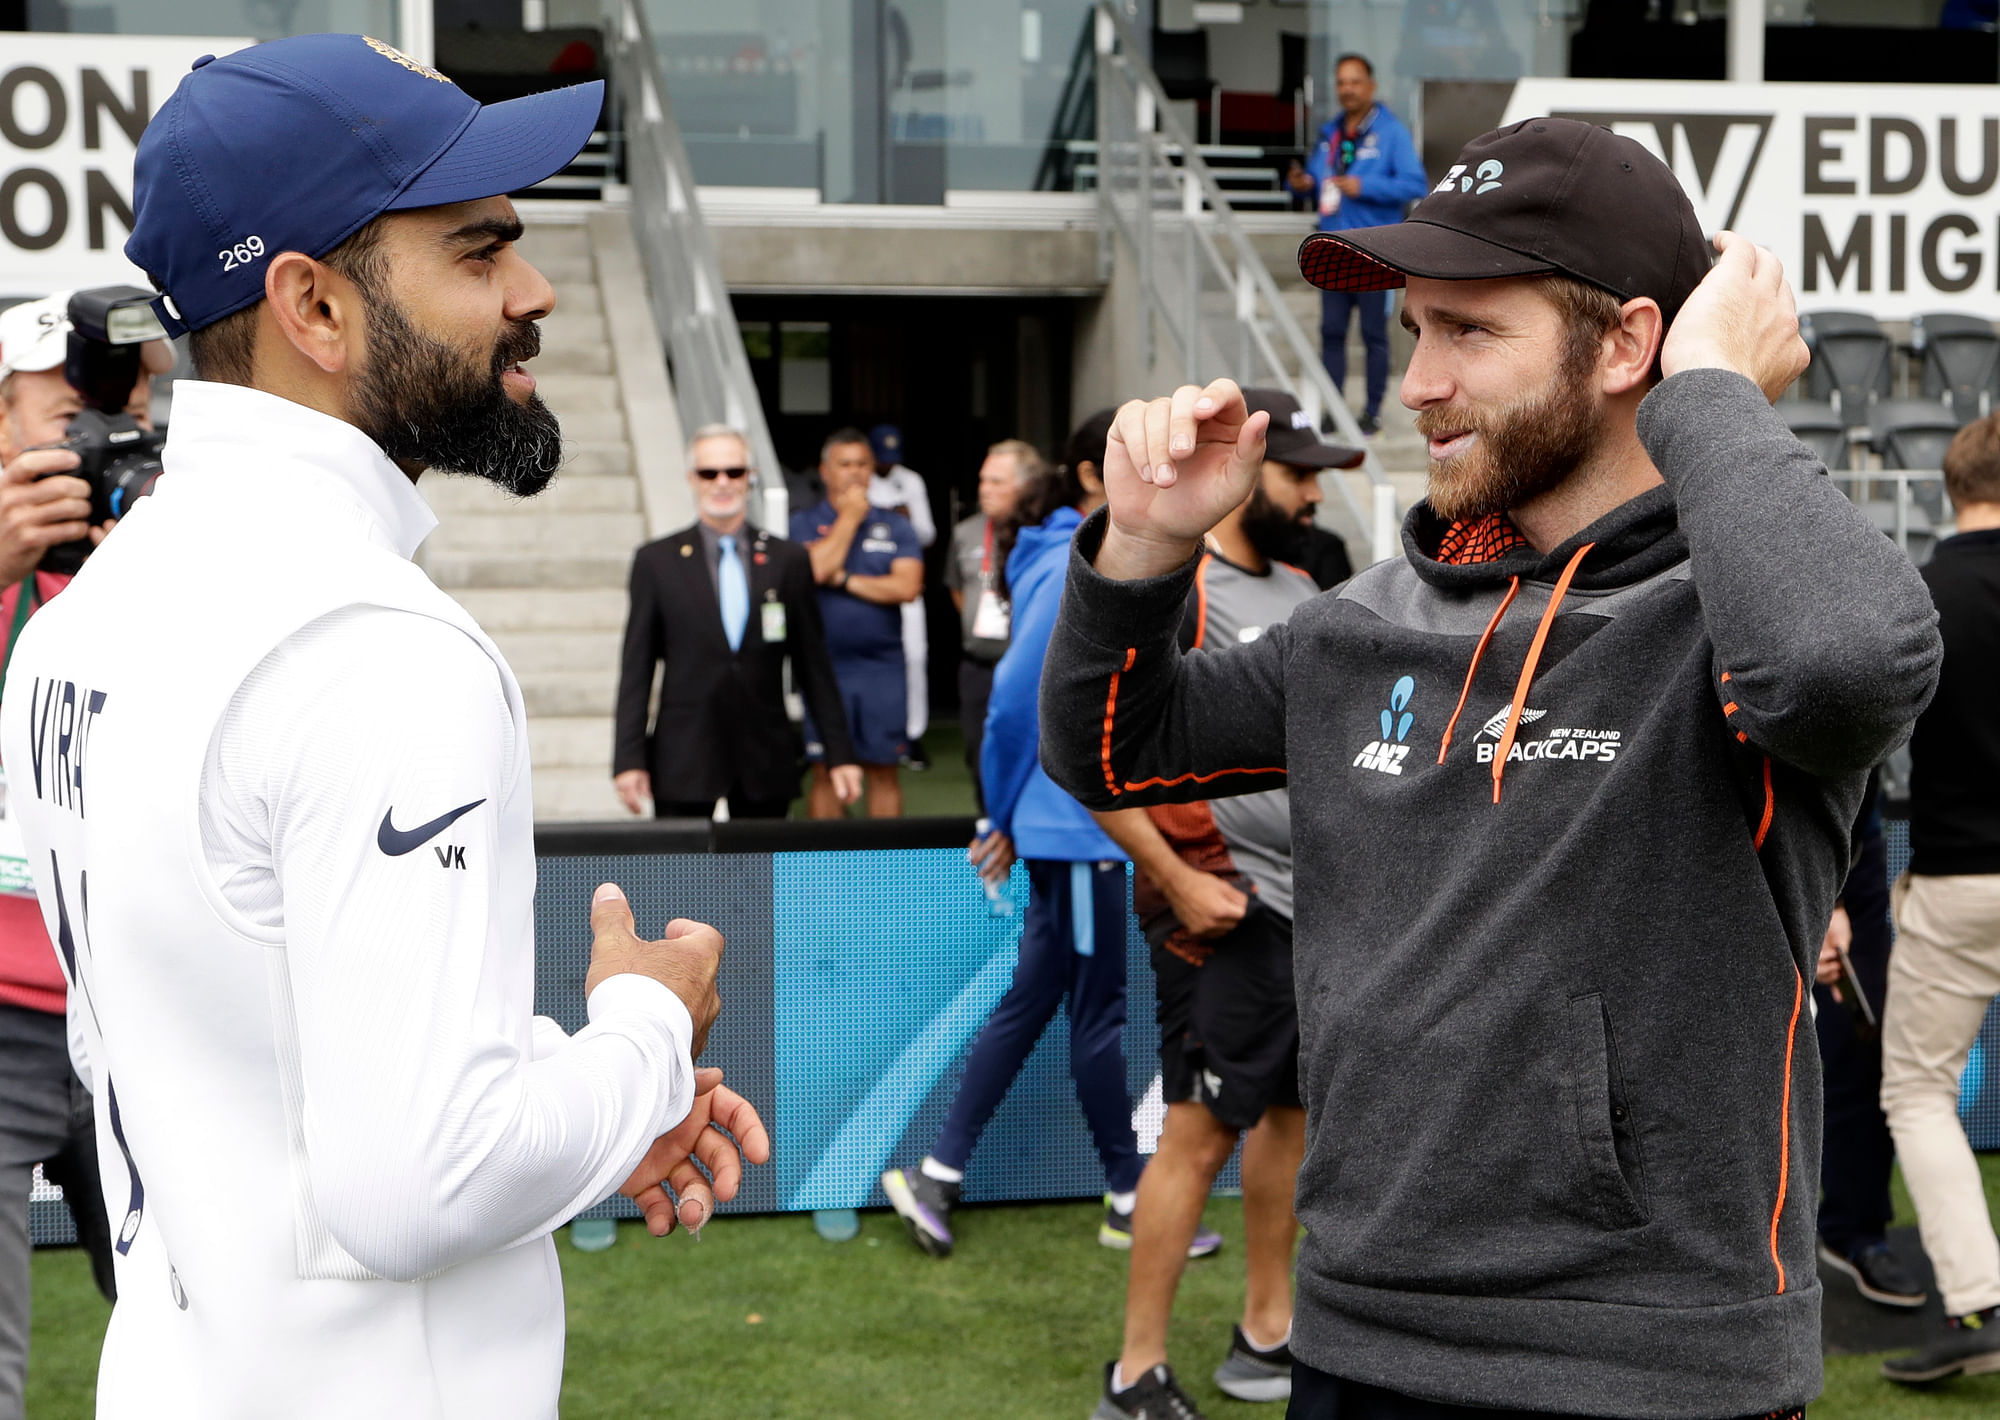 Indian captain Virat Kohli, left, talks with New Zealand captain Kane Williamson following play on day three of the second cricket test between New Zealand and India at Hagley Oval in Christchurch, New Zealand.